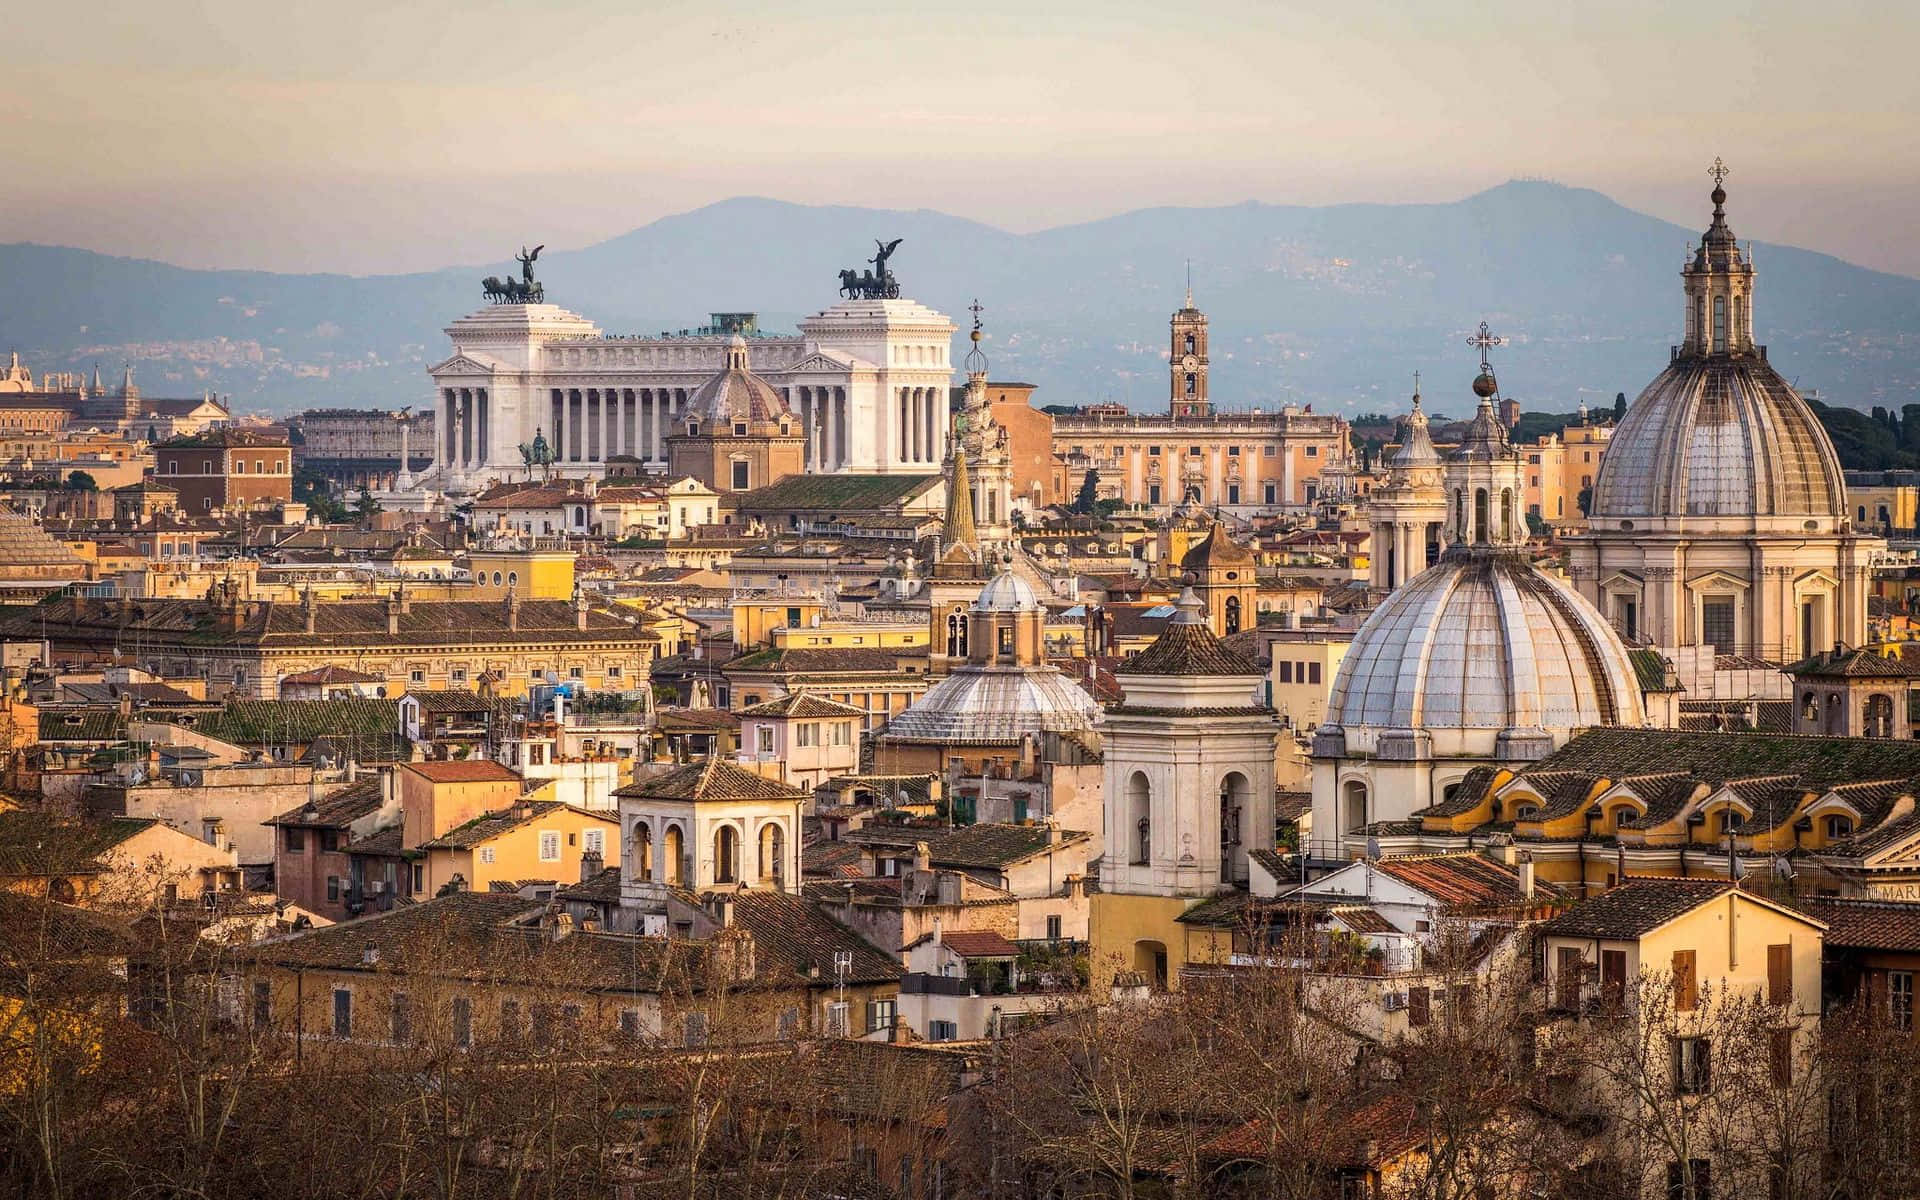 Get Lost in the Beauty of Rome